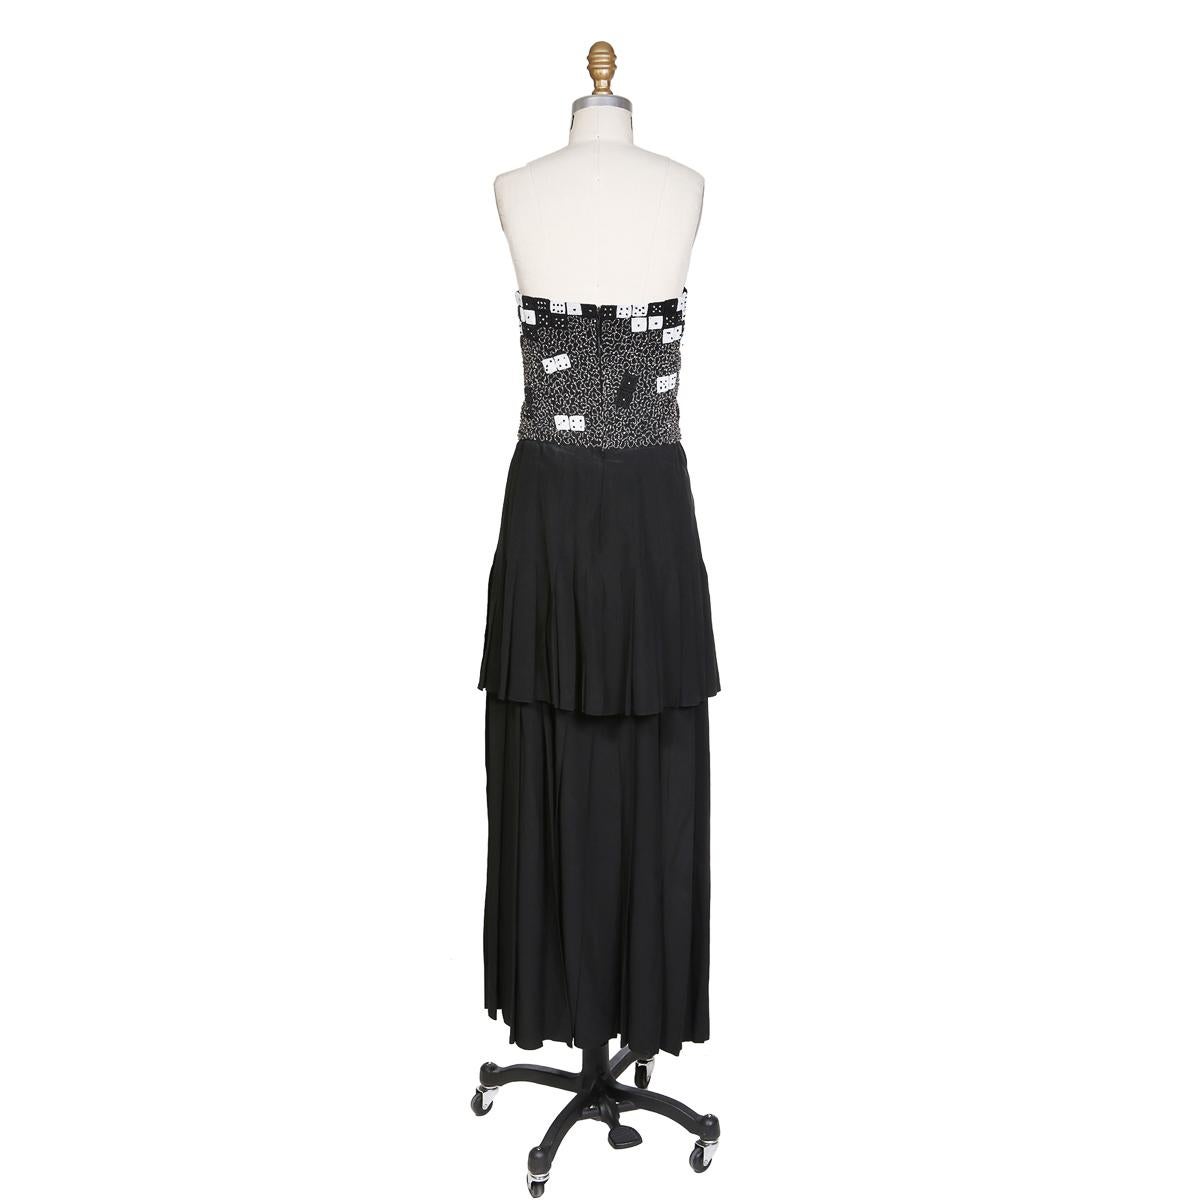 Vintage dress by Karl Lagerfeld for Chloe circa 1970s/1980s
Strapless with hidden back zipper closure
Beaded bust in dice motif
Two-tier pleated skirt
Silk
Condition: Great vintage condition, with minor wear to fabric and beading